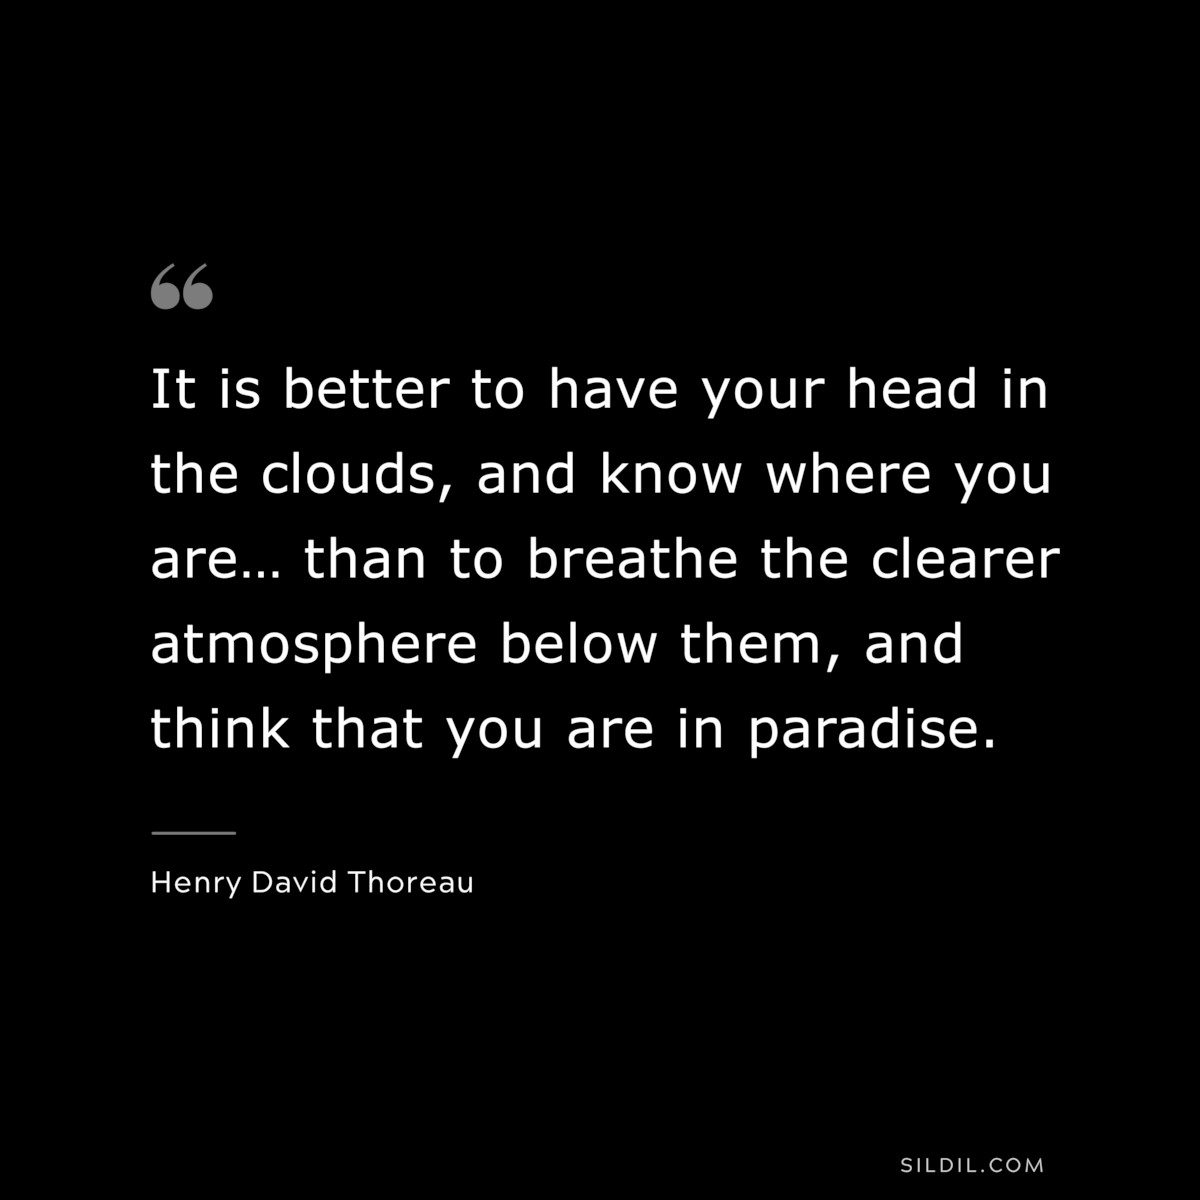 It is better to have your head in the clouds, and know where you are… than to breathe the clearer atmosphere below them, and think that you are in paradise. — Henry David Thoreau